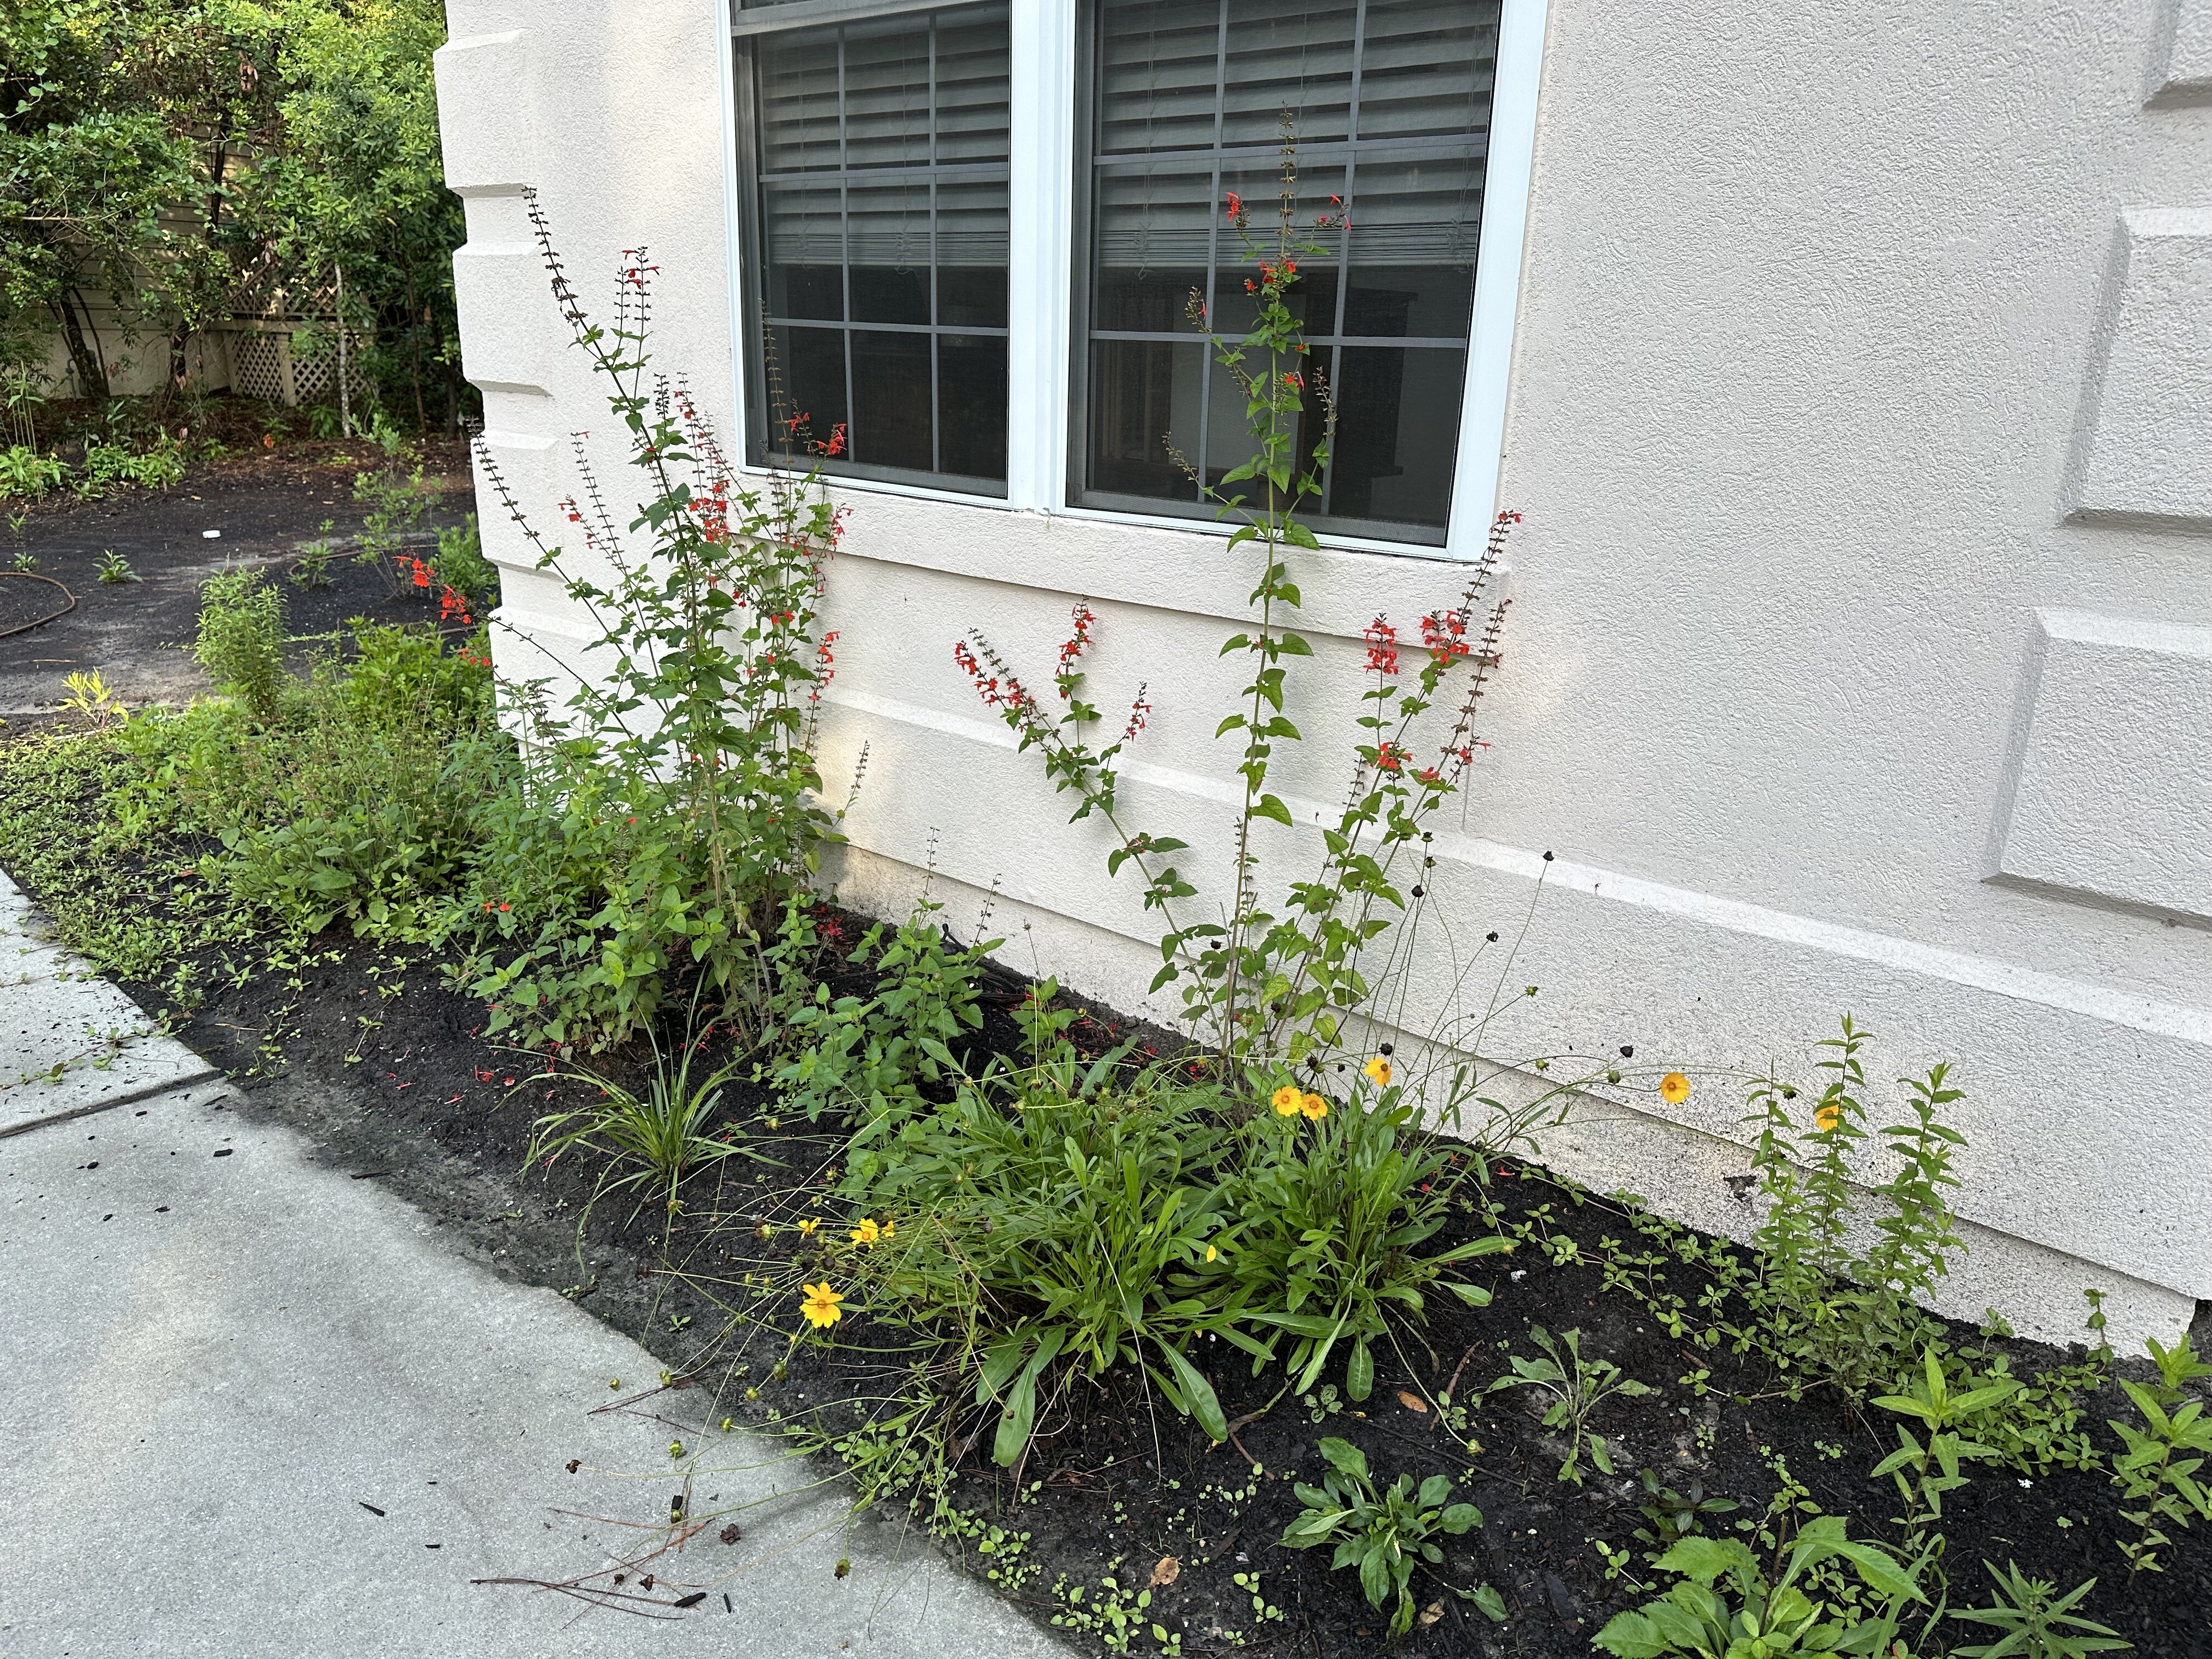 The side garden of a home with a garden bed full of native plants from Garden for Wildlife